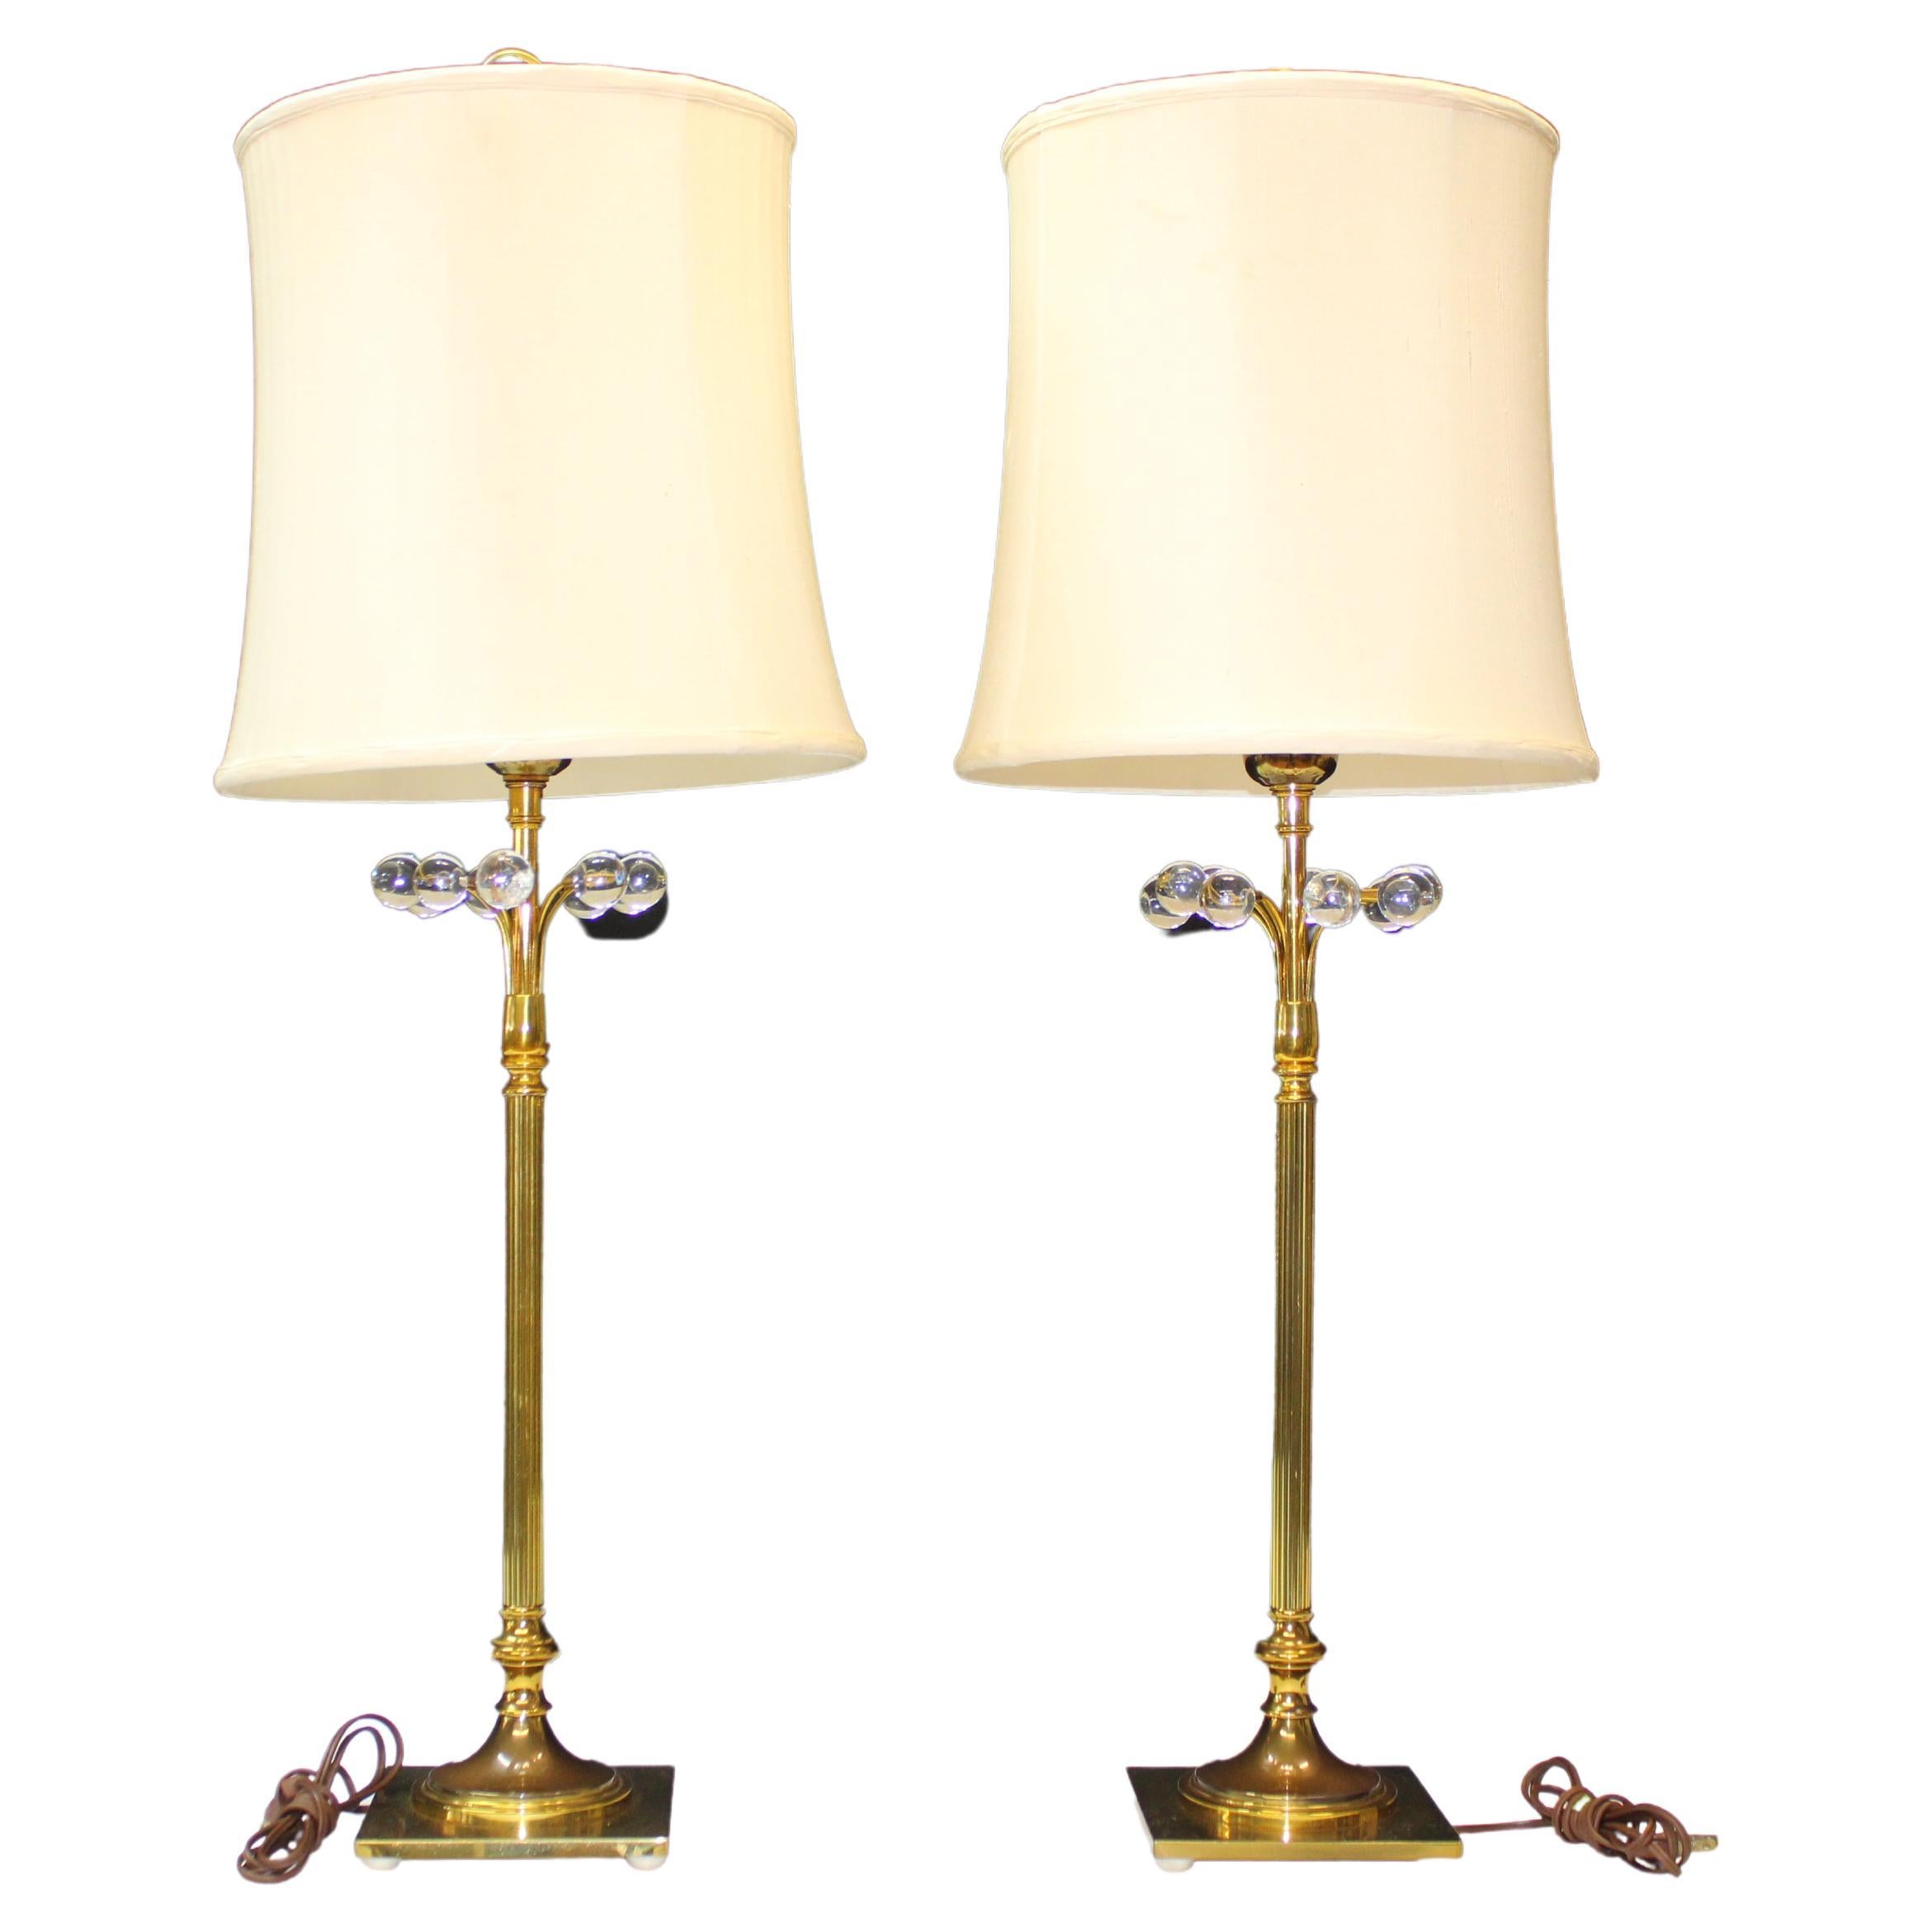 Pr 1950s Decorative Brass and Glass Ball Table Lamps with Shades